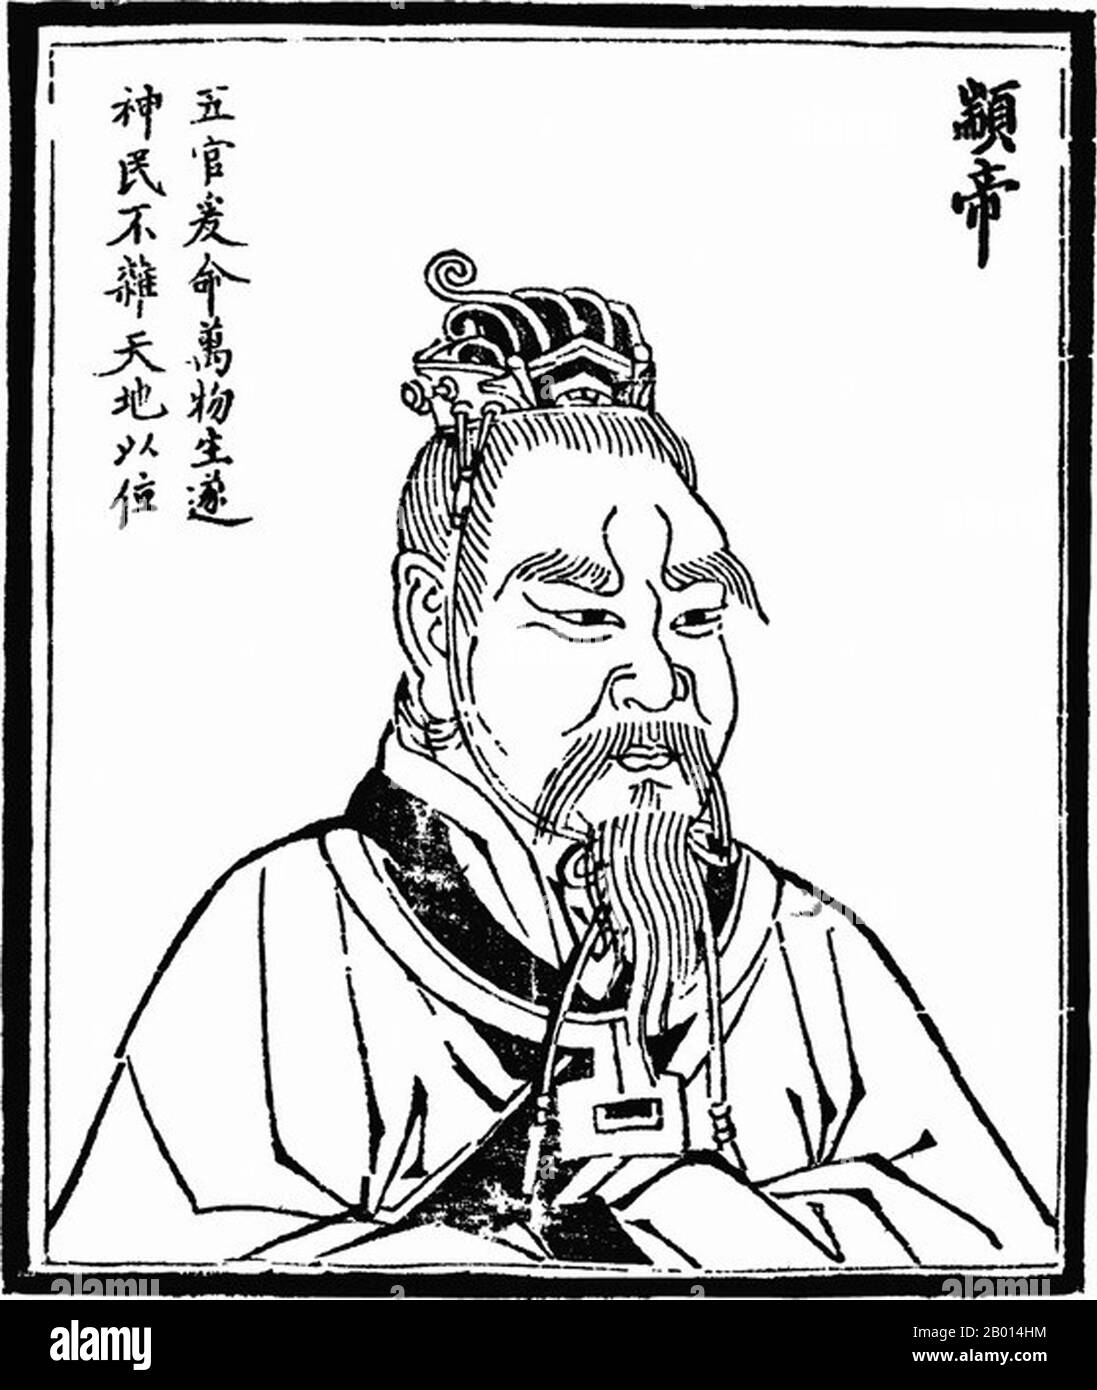 China: Emperor Zhuanxu (c.2514-2436 BCE), second of the legendary 'Five Emperors'. Illustration, c. 1498.  Zhuanxu, also known as Gaoyang, was a mythological emperor of ancient China. A grandson of the Yellow Emperor, he became sovereign at the age of twenty. He passed religious reforms to oppose shamanism, and contributed to a unified calendar as well as the field of astrology. He is sometimes worshipped as the god of the Pole Star.  The Three Sovereigns and Five Emperors are a blend of mythological rulers and cultural heroes of ancient China dating loosely from the period c. 3500-2000 BCE. Stock Photo